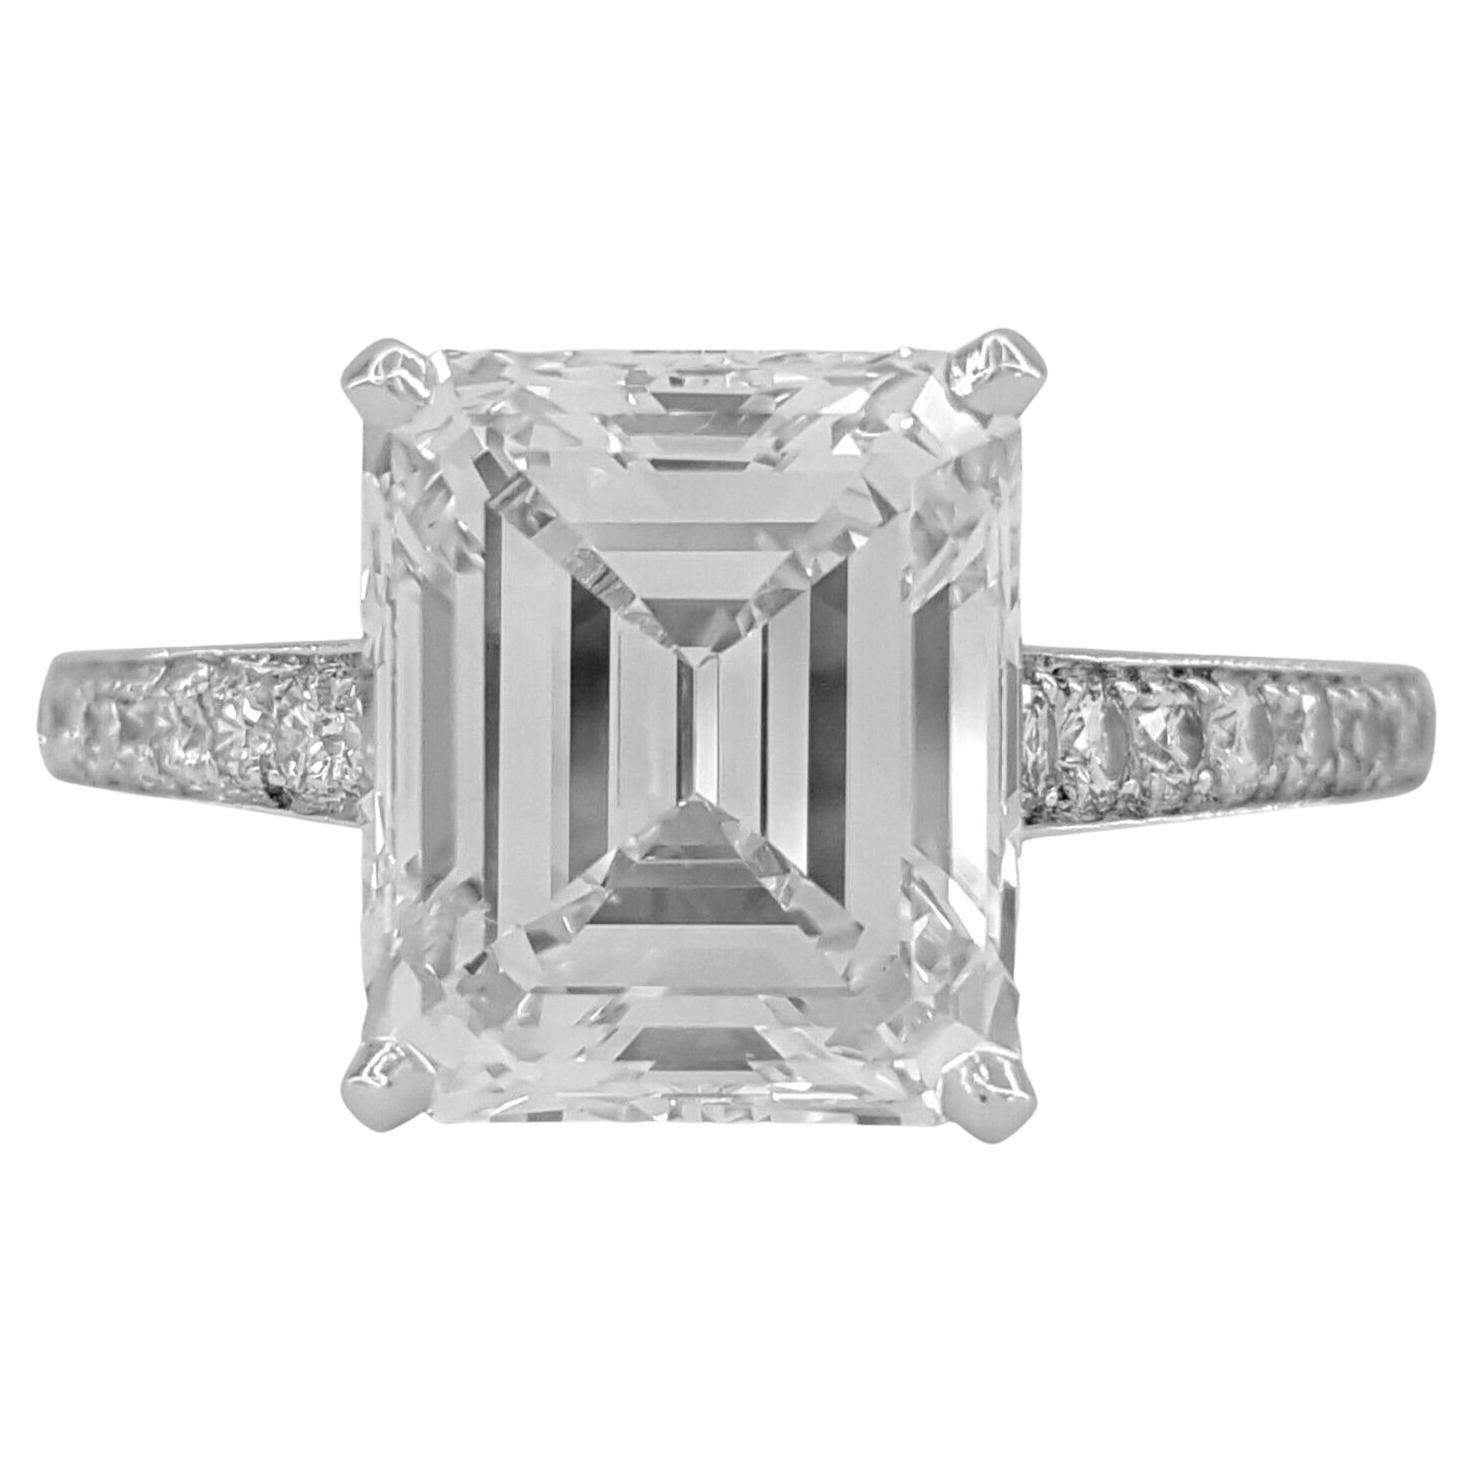 FLAWLESS E COLOR GIA Certified 2.74 Carat Diamond Ring For Sale